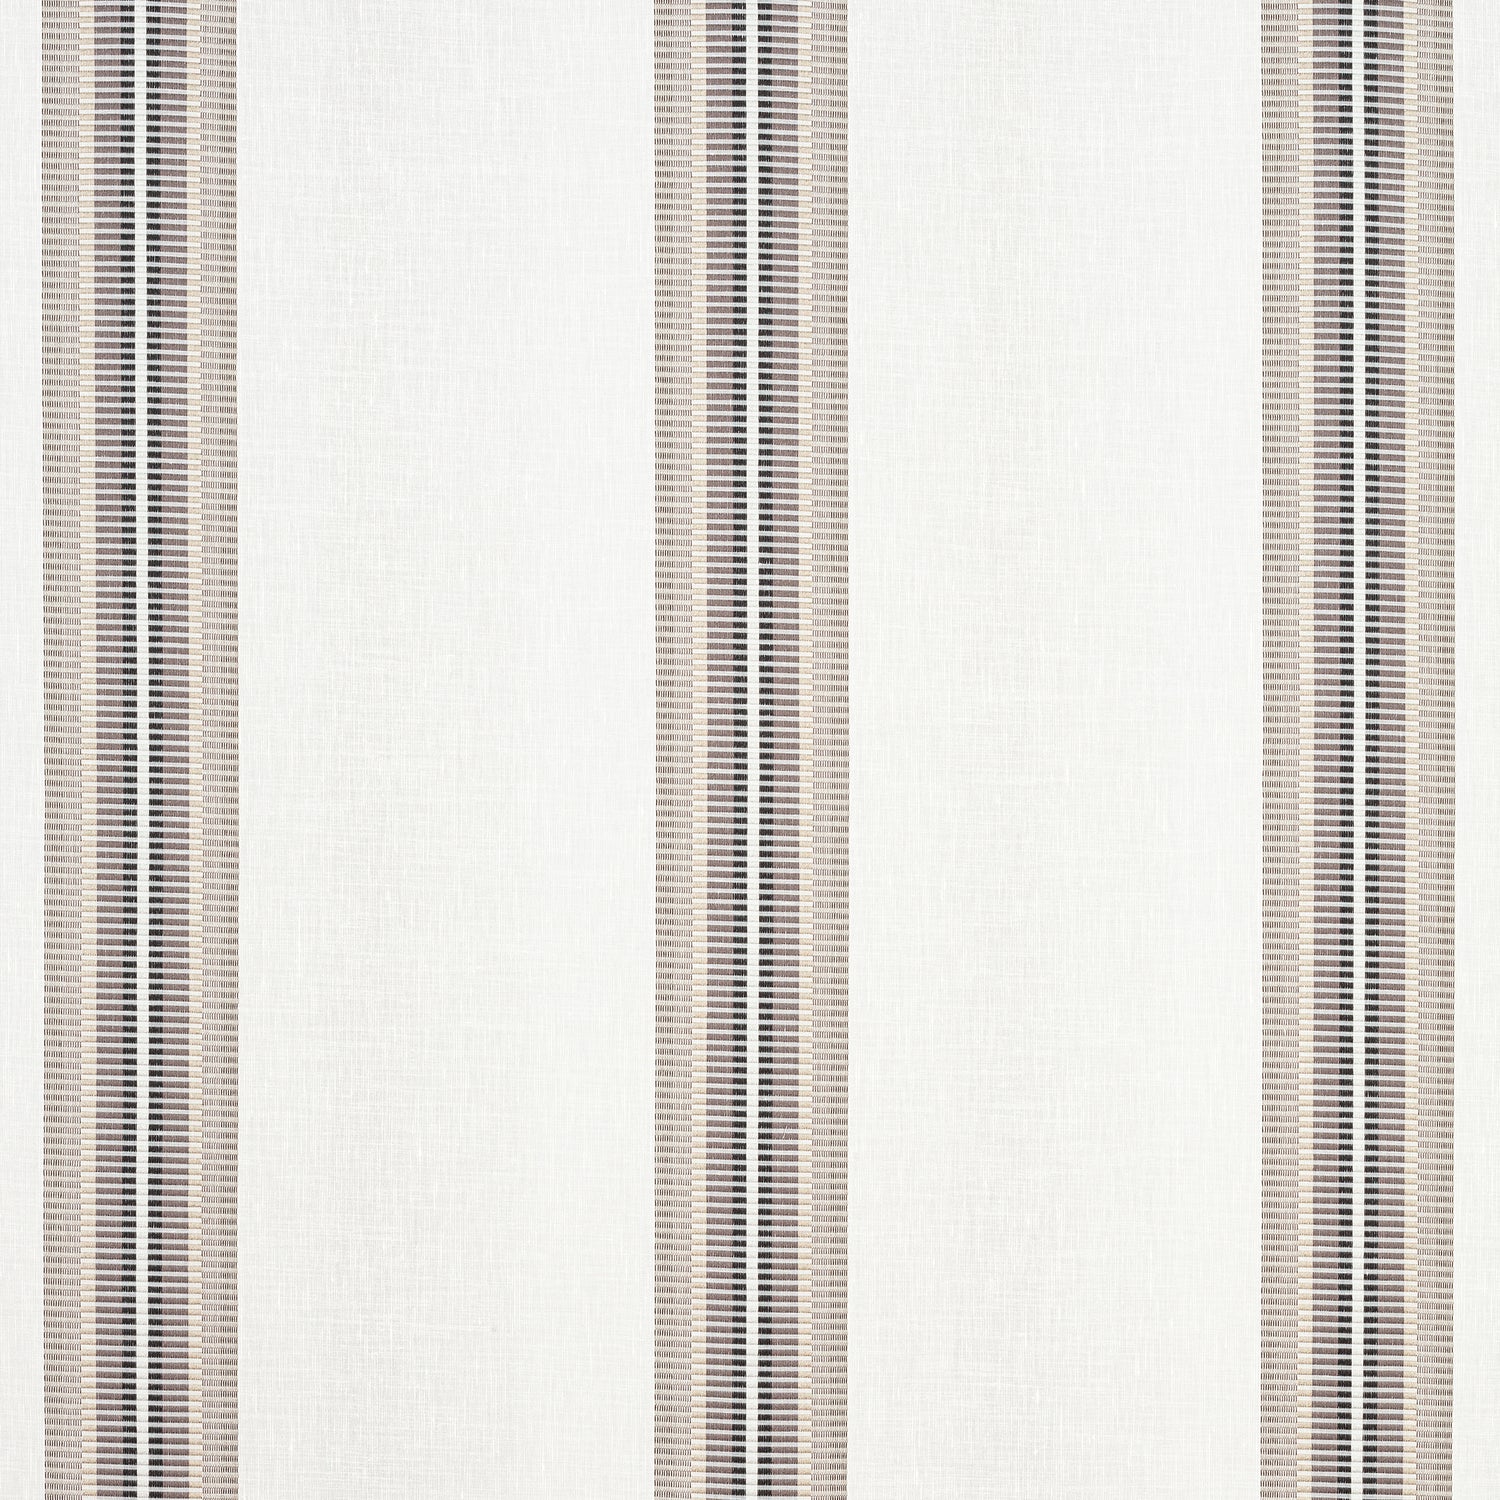 Stanley Stripe fabric in truffle color - pattern number FWW7158 - by Thibaut in the Atmosphere collection